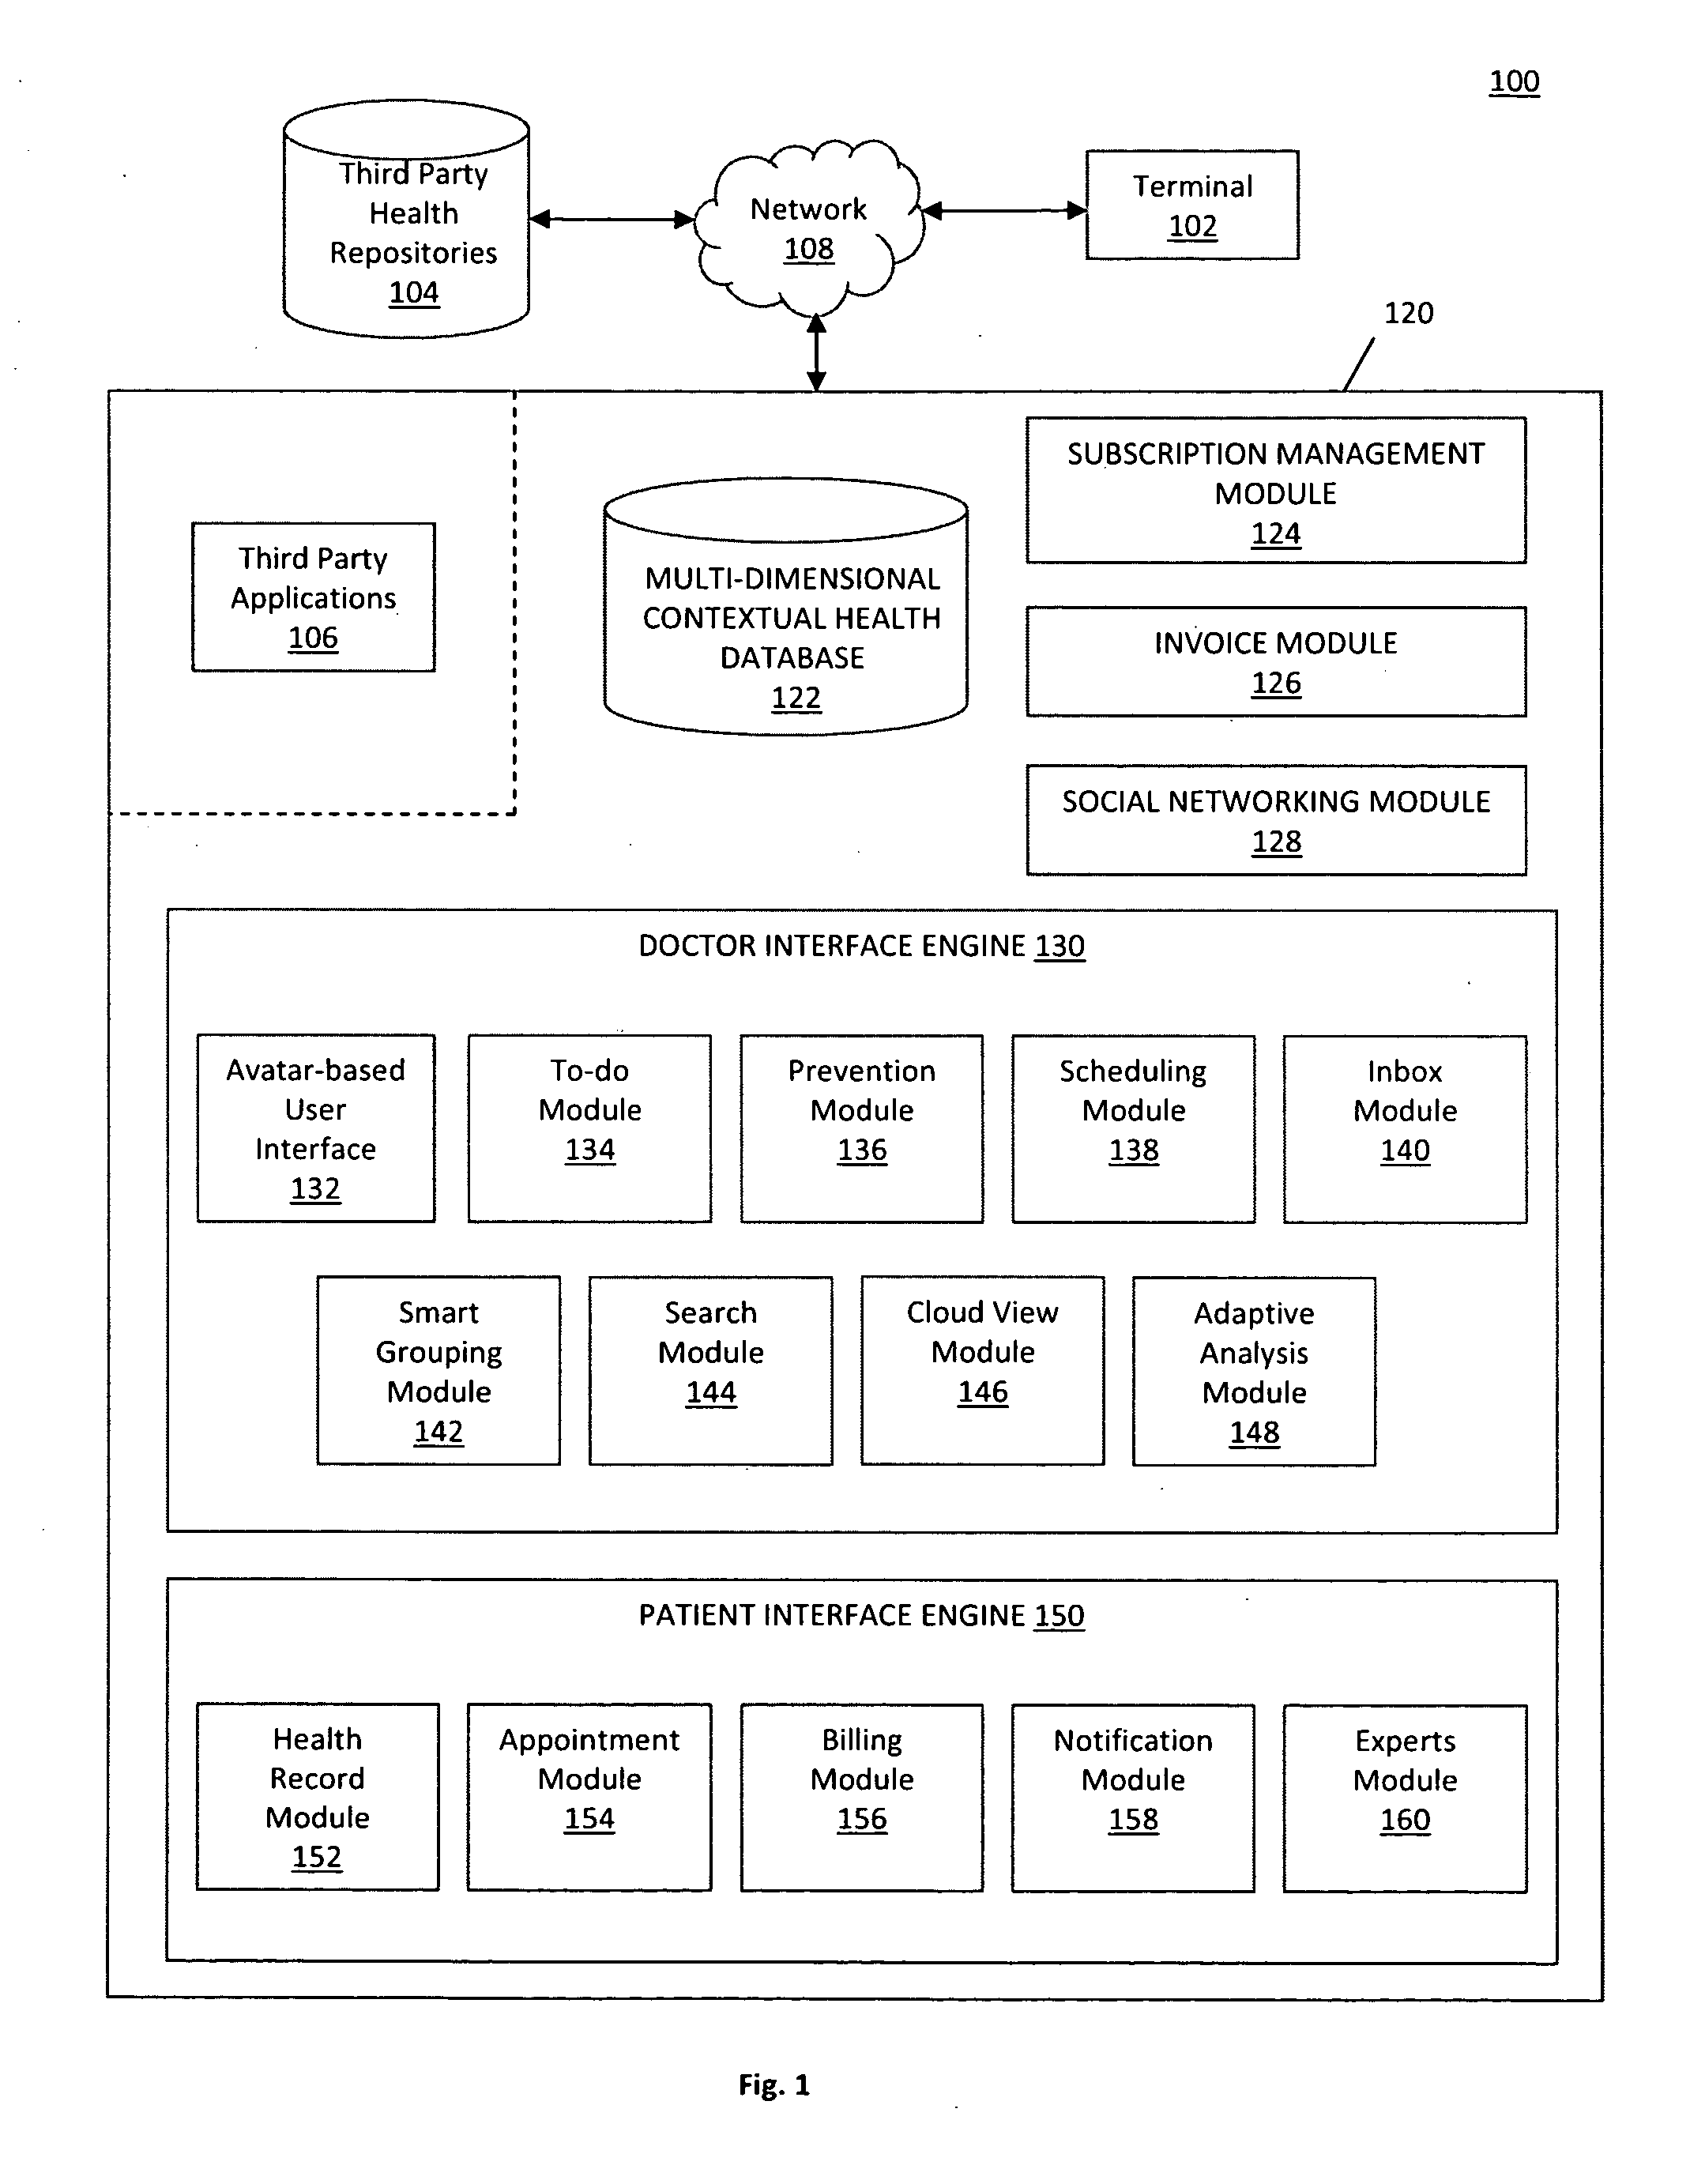 System and method for providing a multi-dimensional contextual platform for managing a medical practice